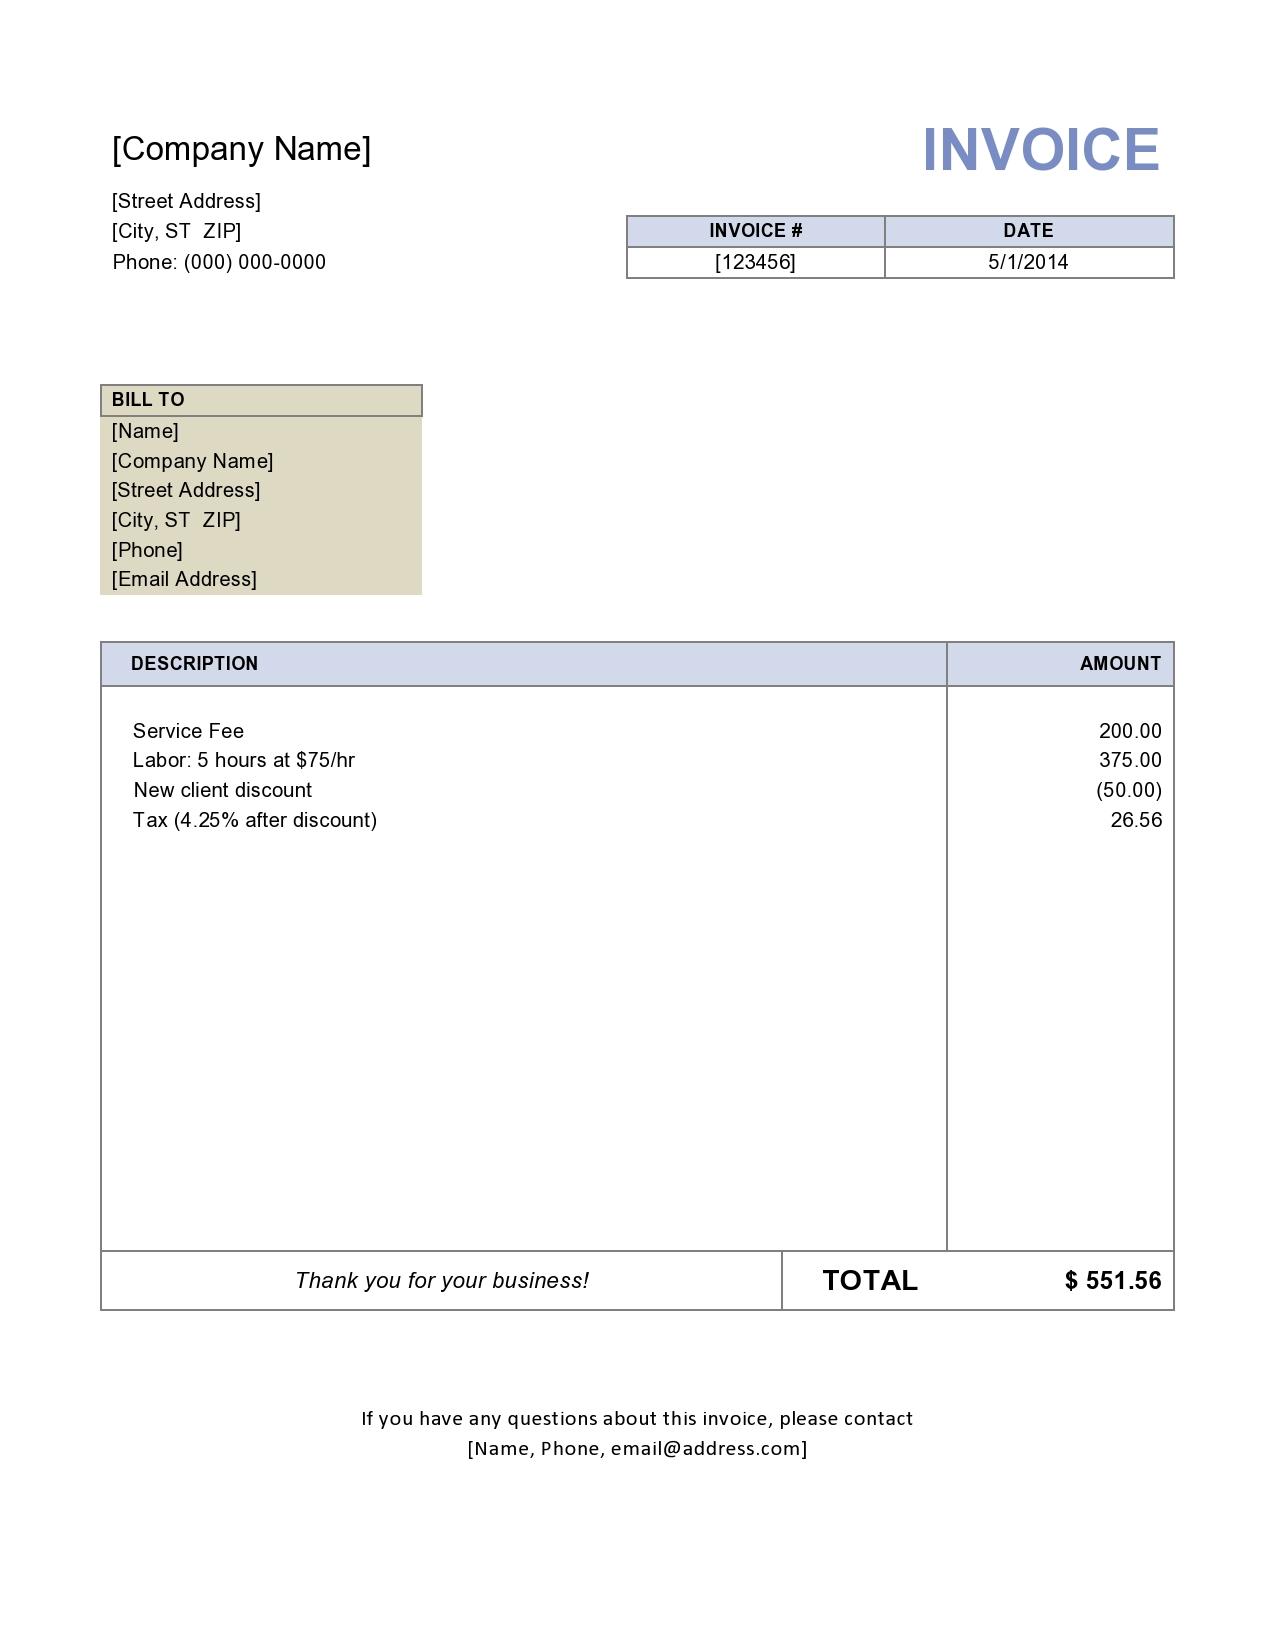 invoice template in word format